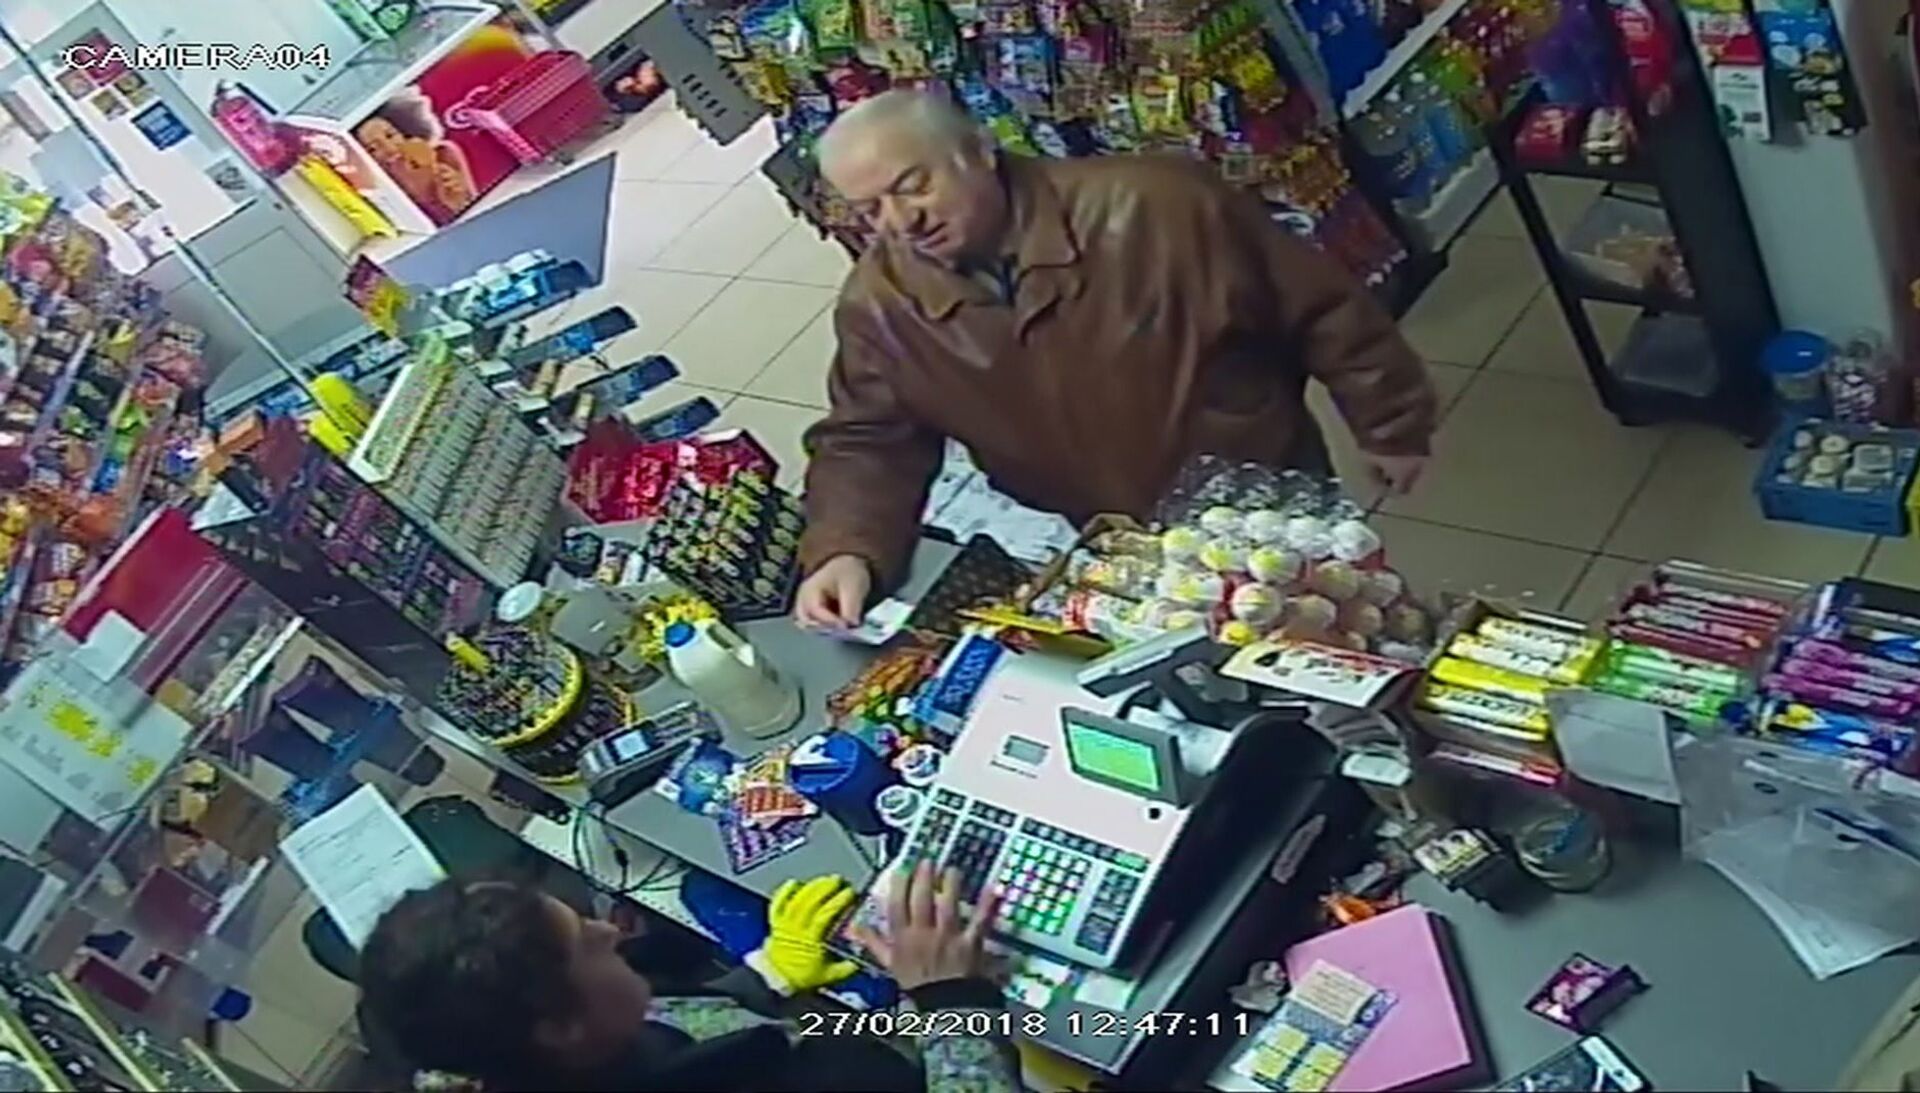 FILE - In this Feb. 27, 2018 file grab taken from CCTV video provided by ITN, former spy Sergei Skripal shops at a store in Salisbury, England - Sputnik International, 1920, 23.09.2021